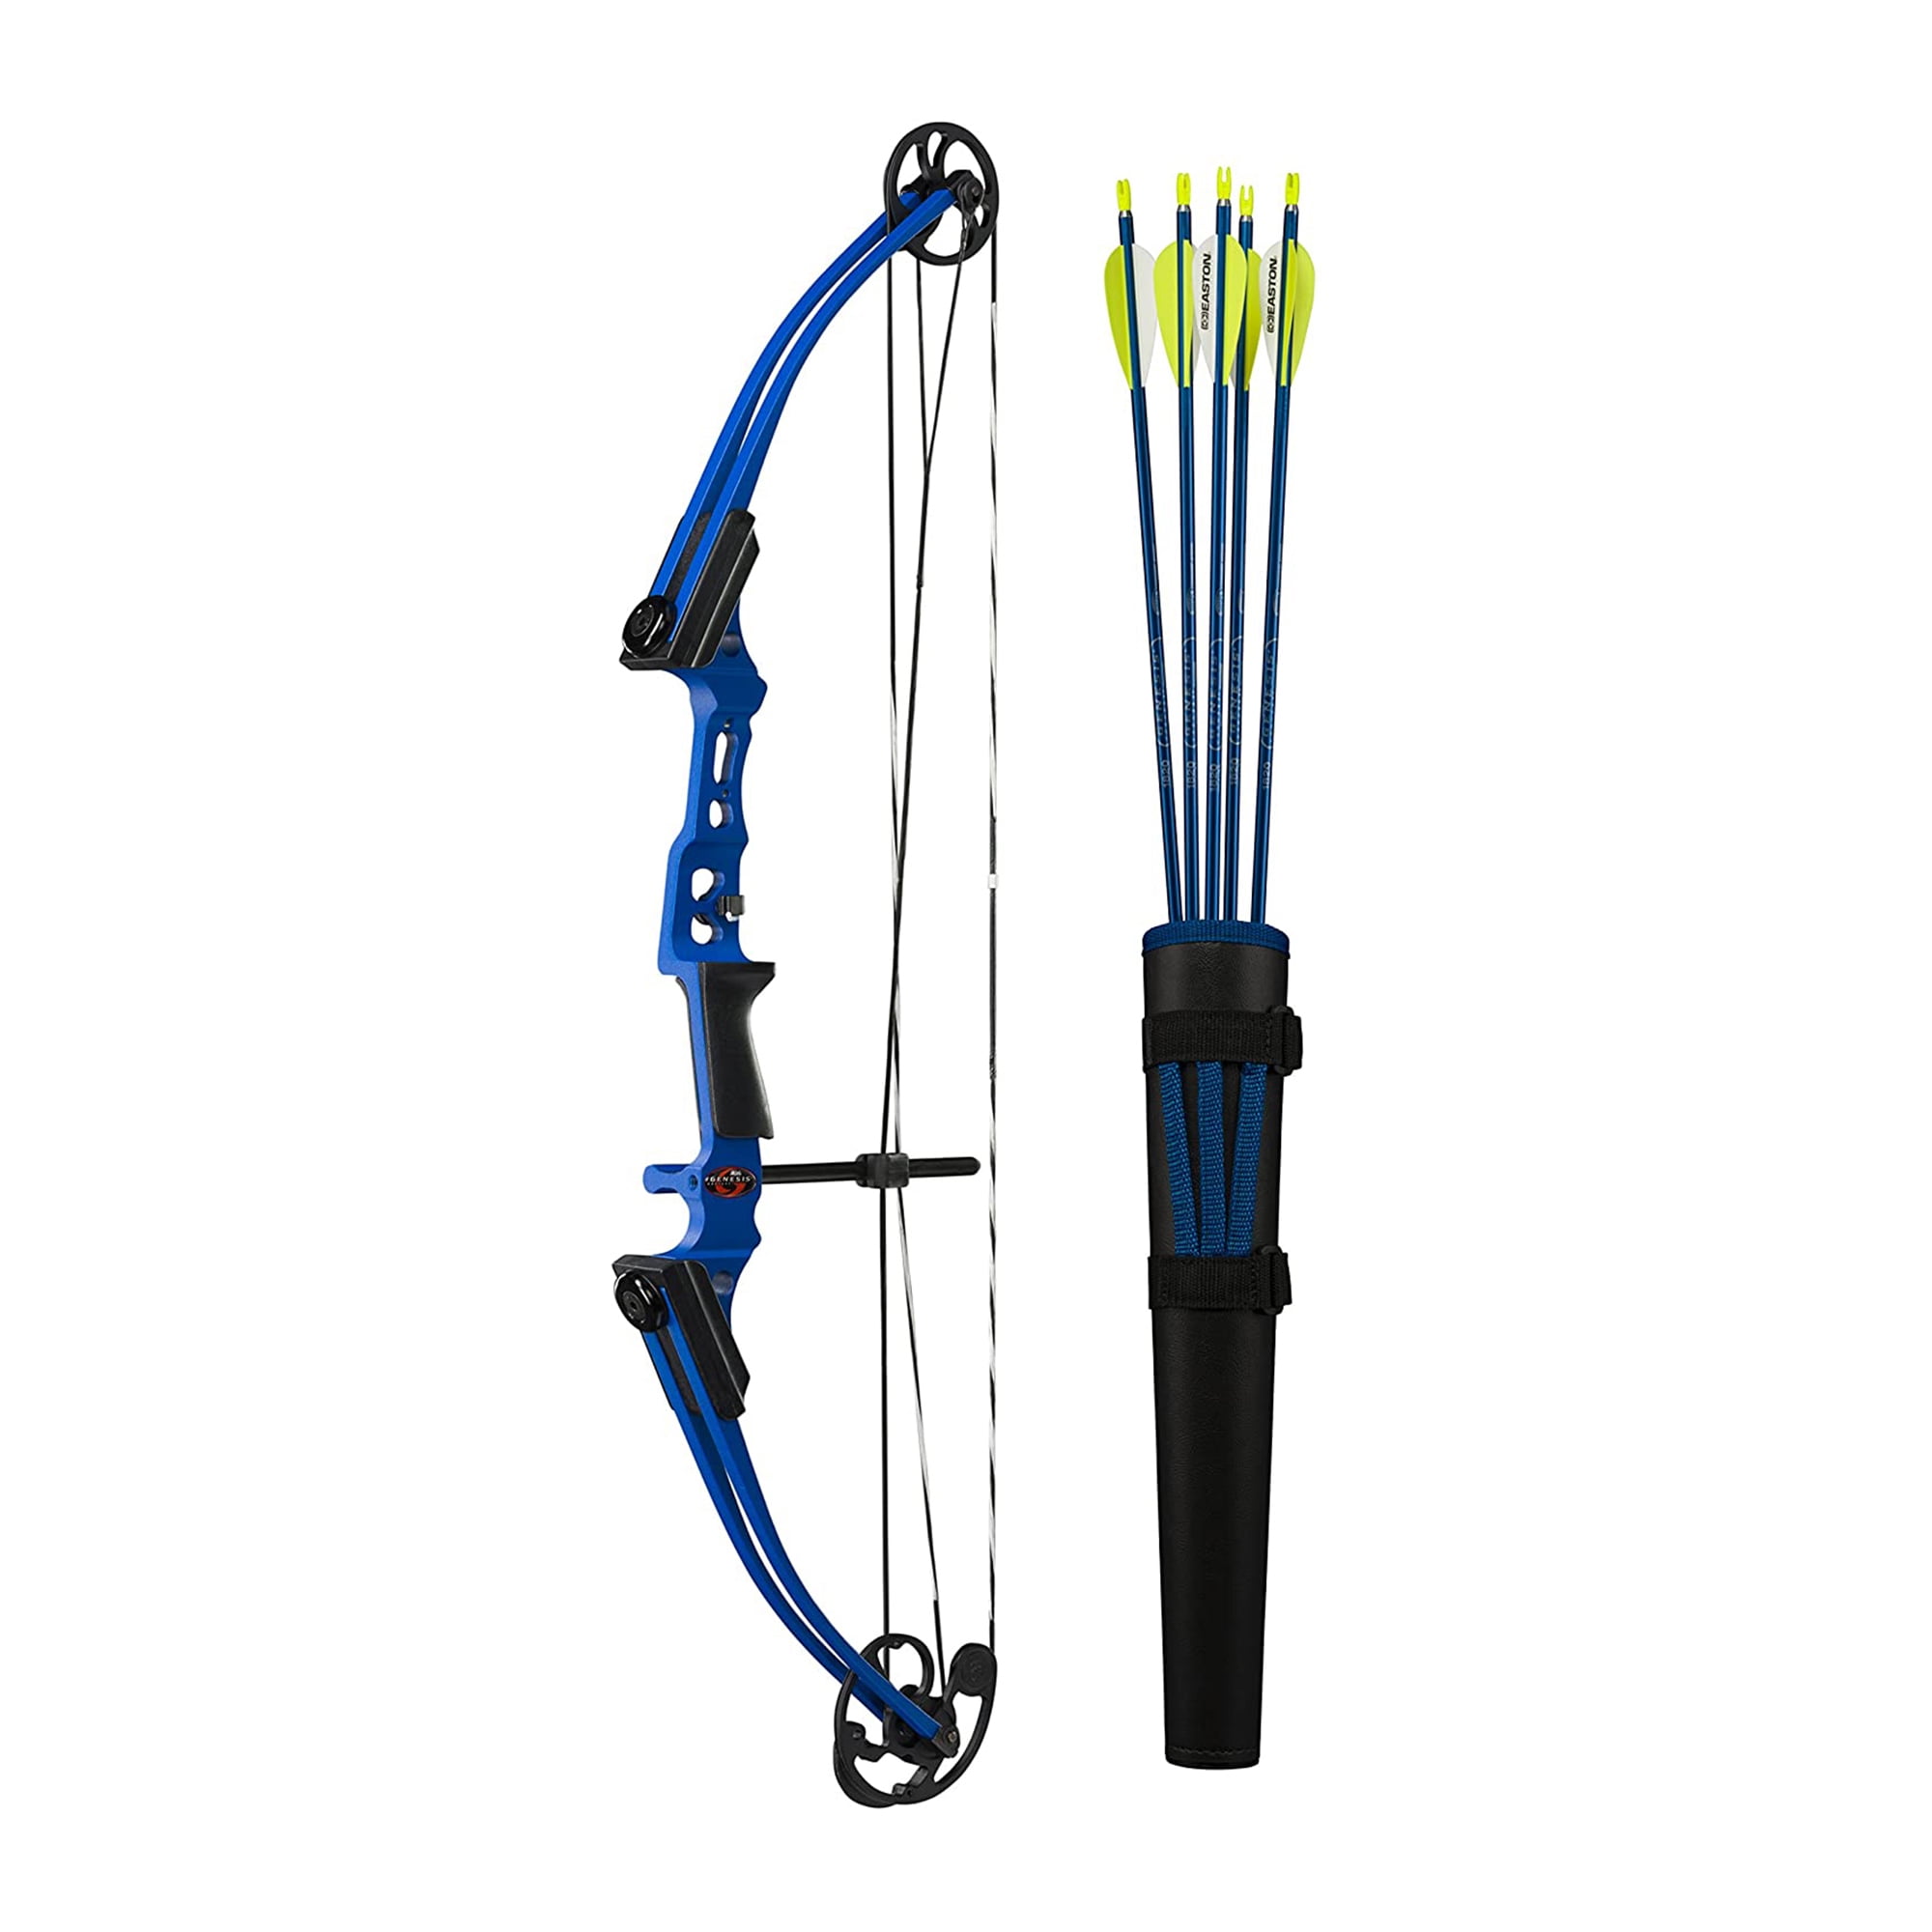 Details about   30/40lbs Archery Hunting Takedown Recurve Bow Longbow Right Hand Shooting Target 